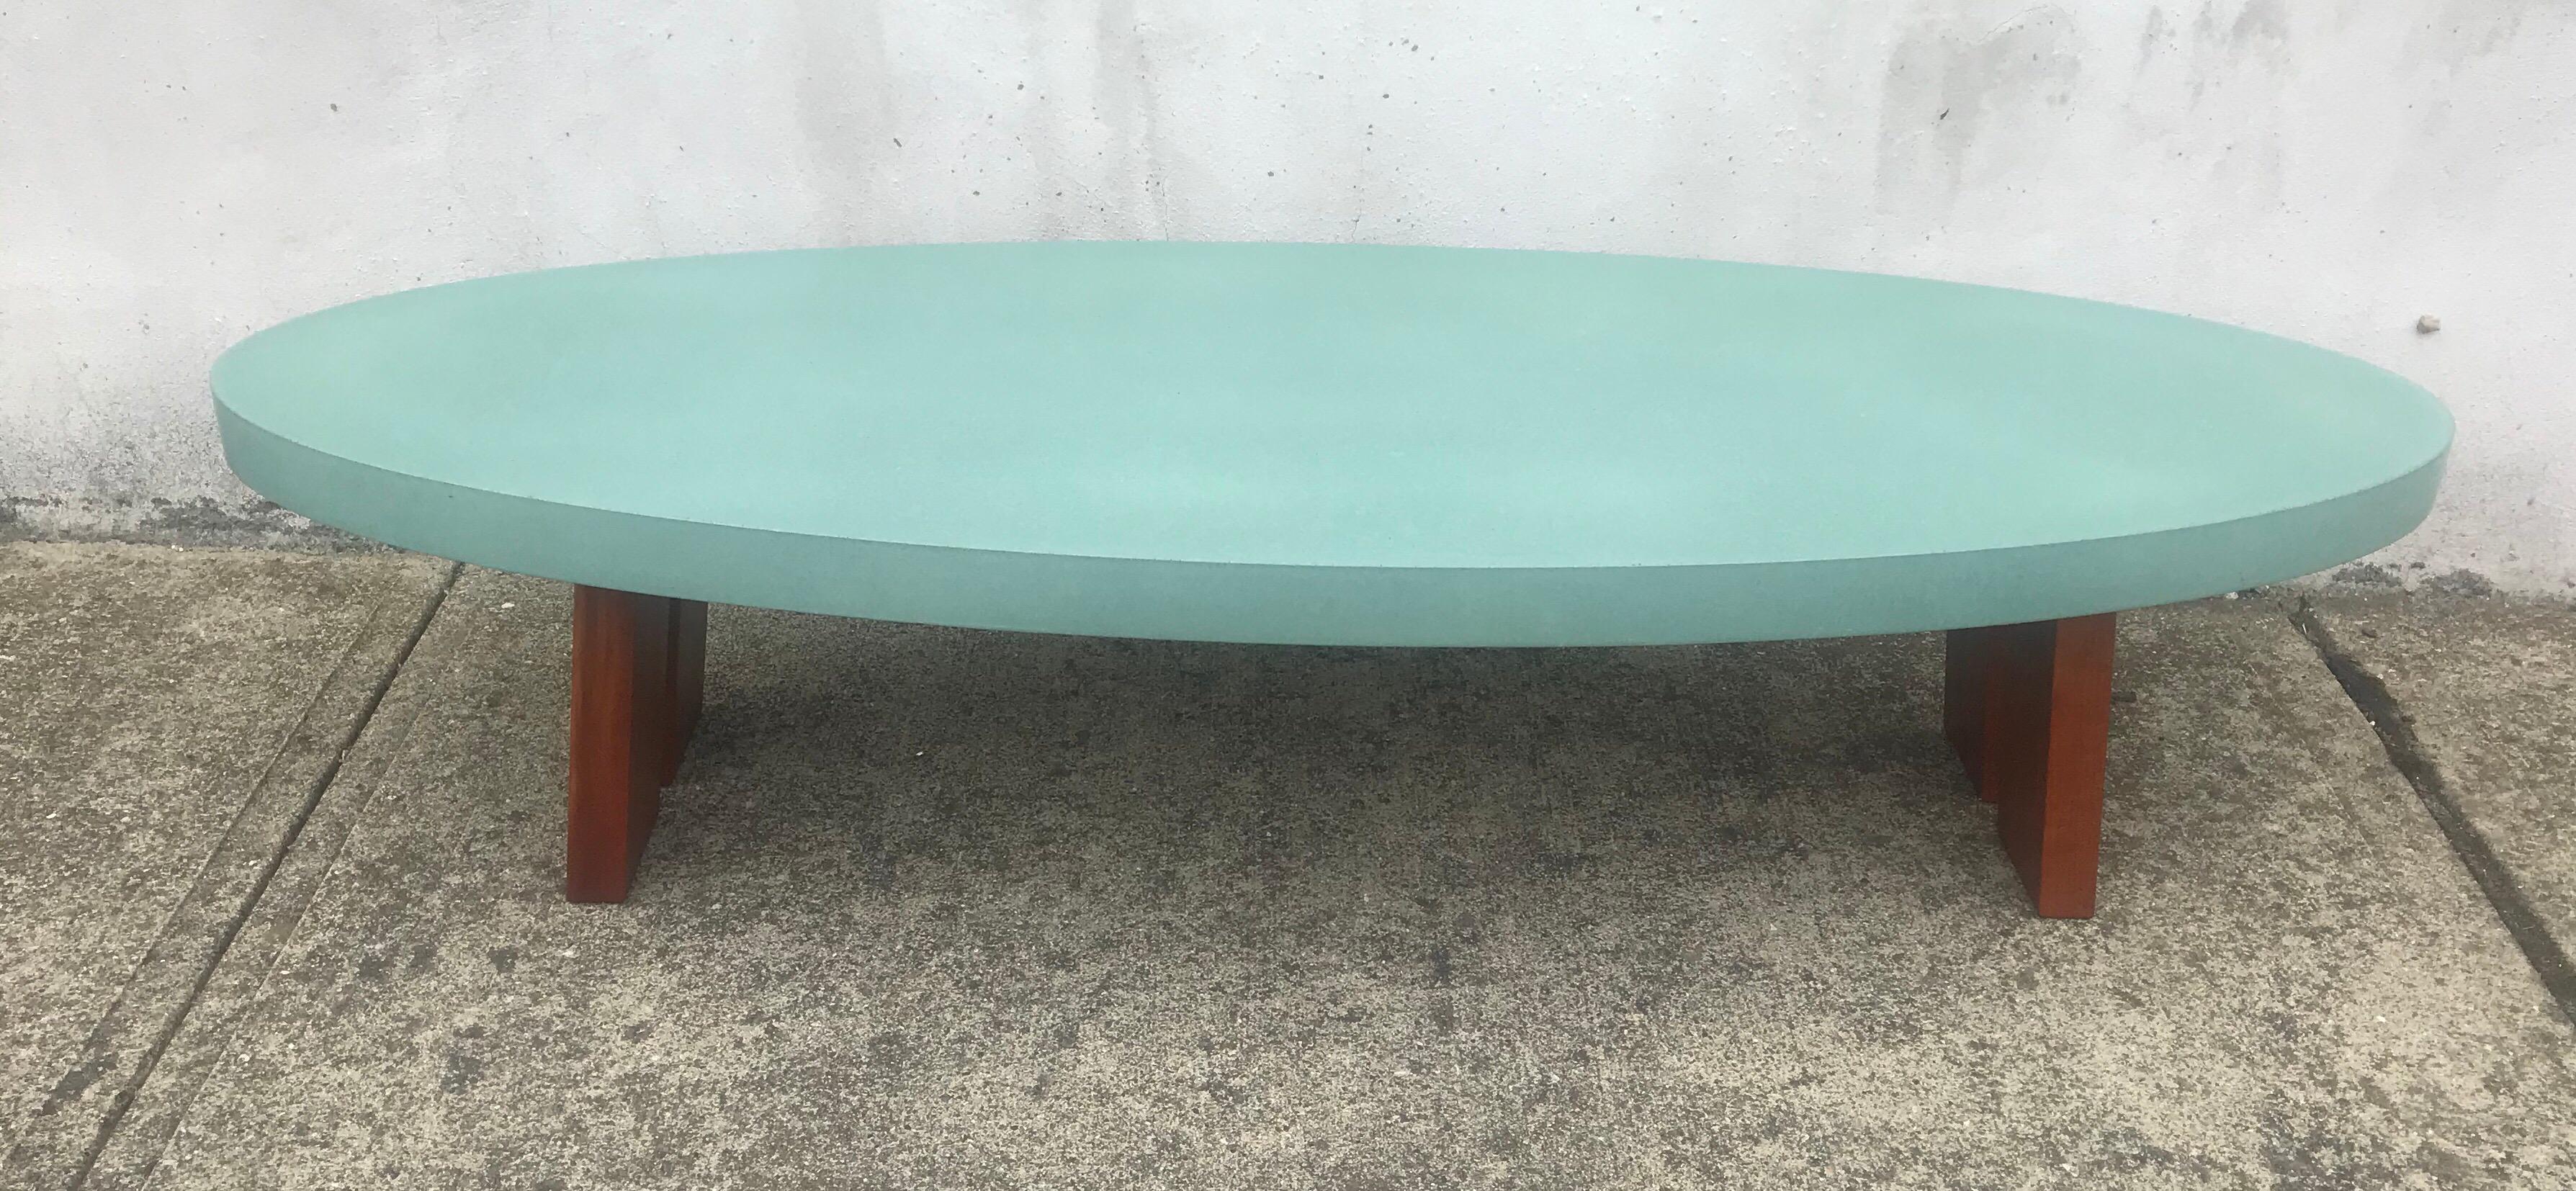 Plaster Turquoise Oval Coffee Table by Peter Sandback, Ettore Sottsass Style